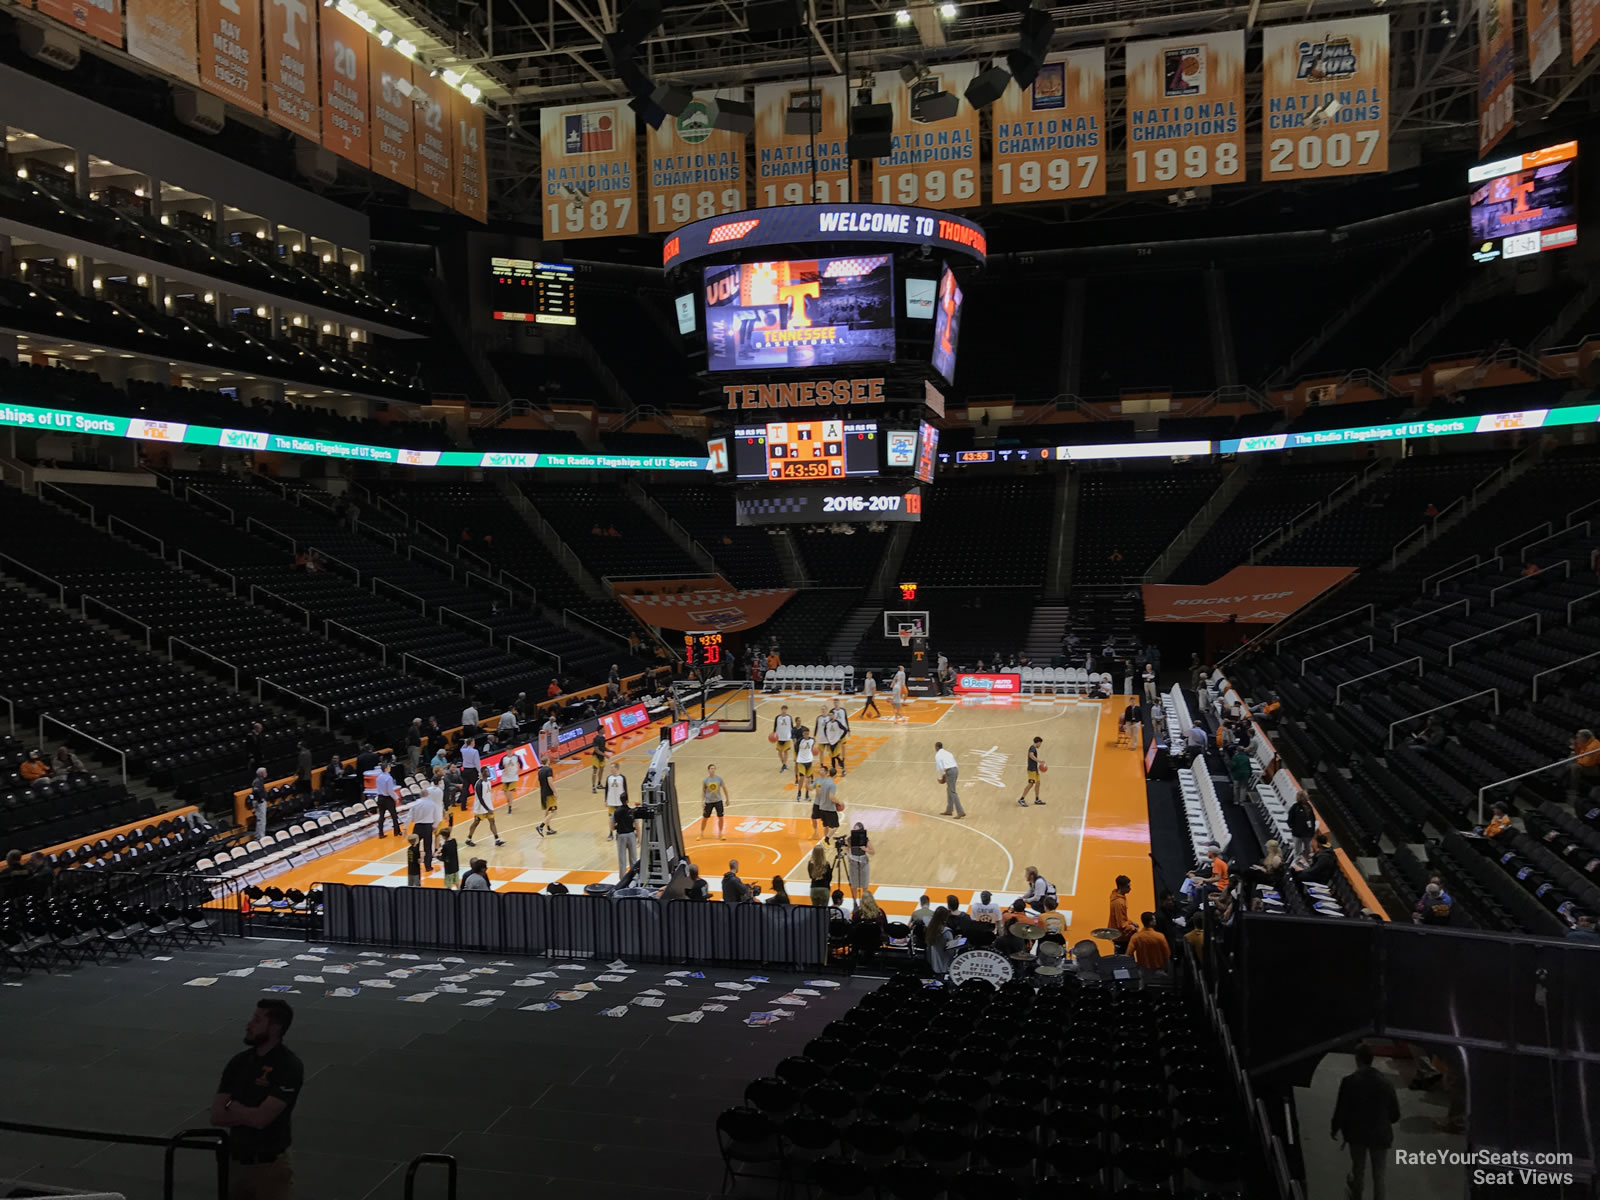 section 128, row 17 seat view  - thompson-boling arena